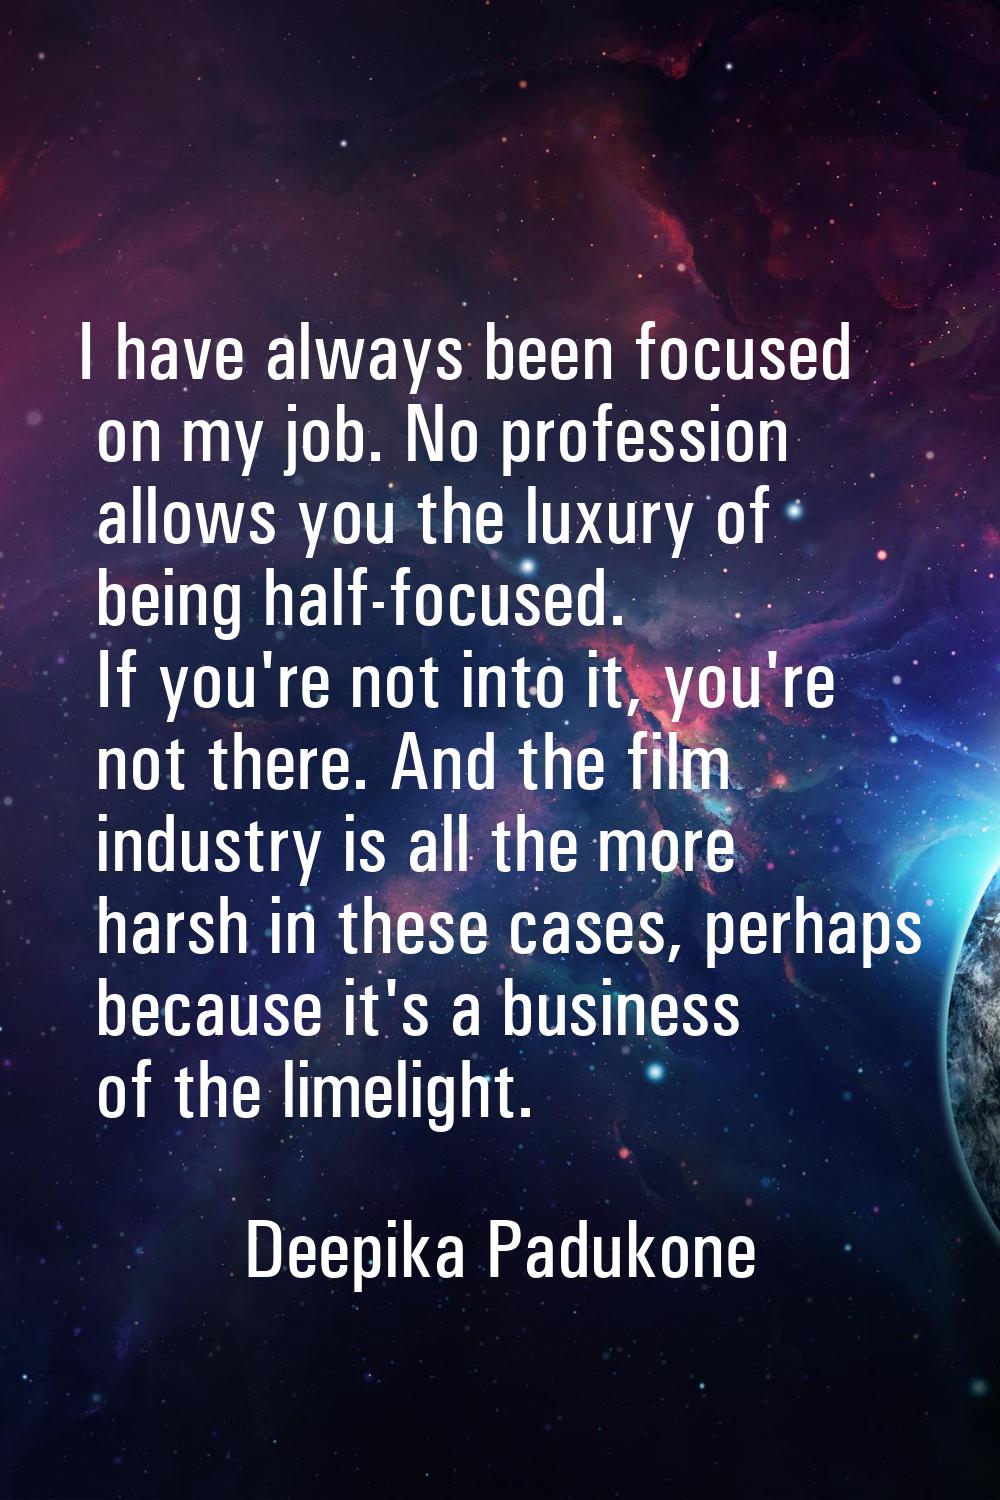 I have always been focused on my job. No profession allows you the luxury of being half-focused. If